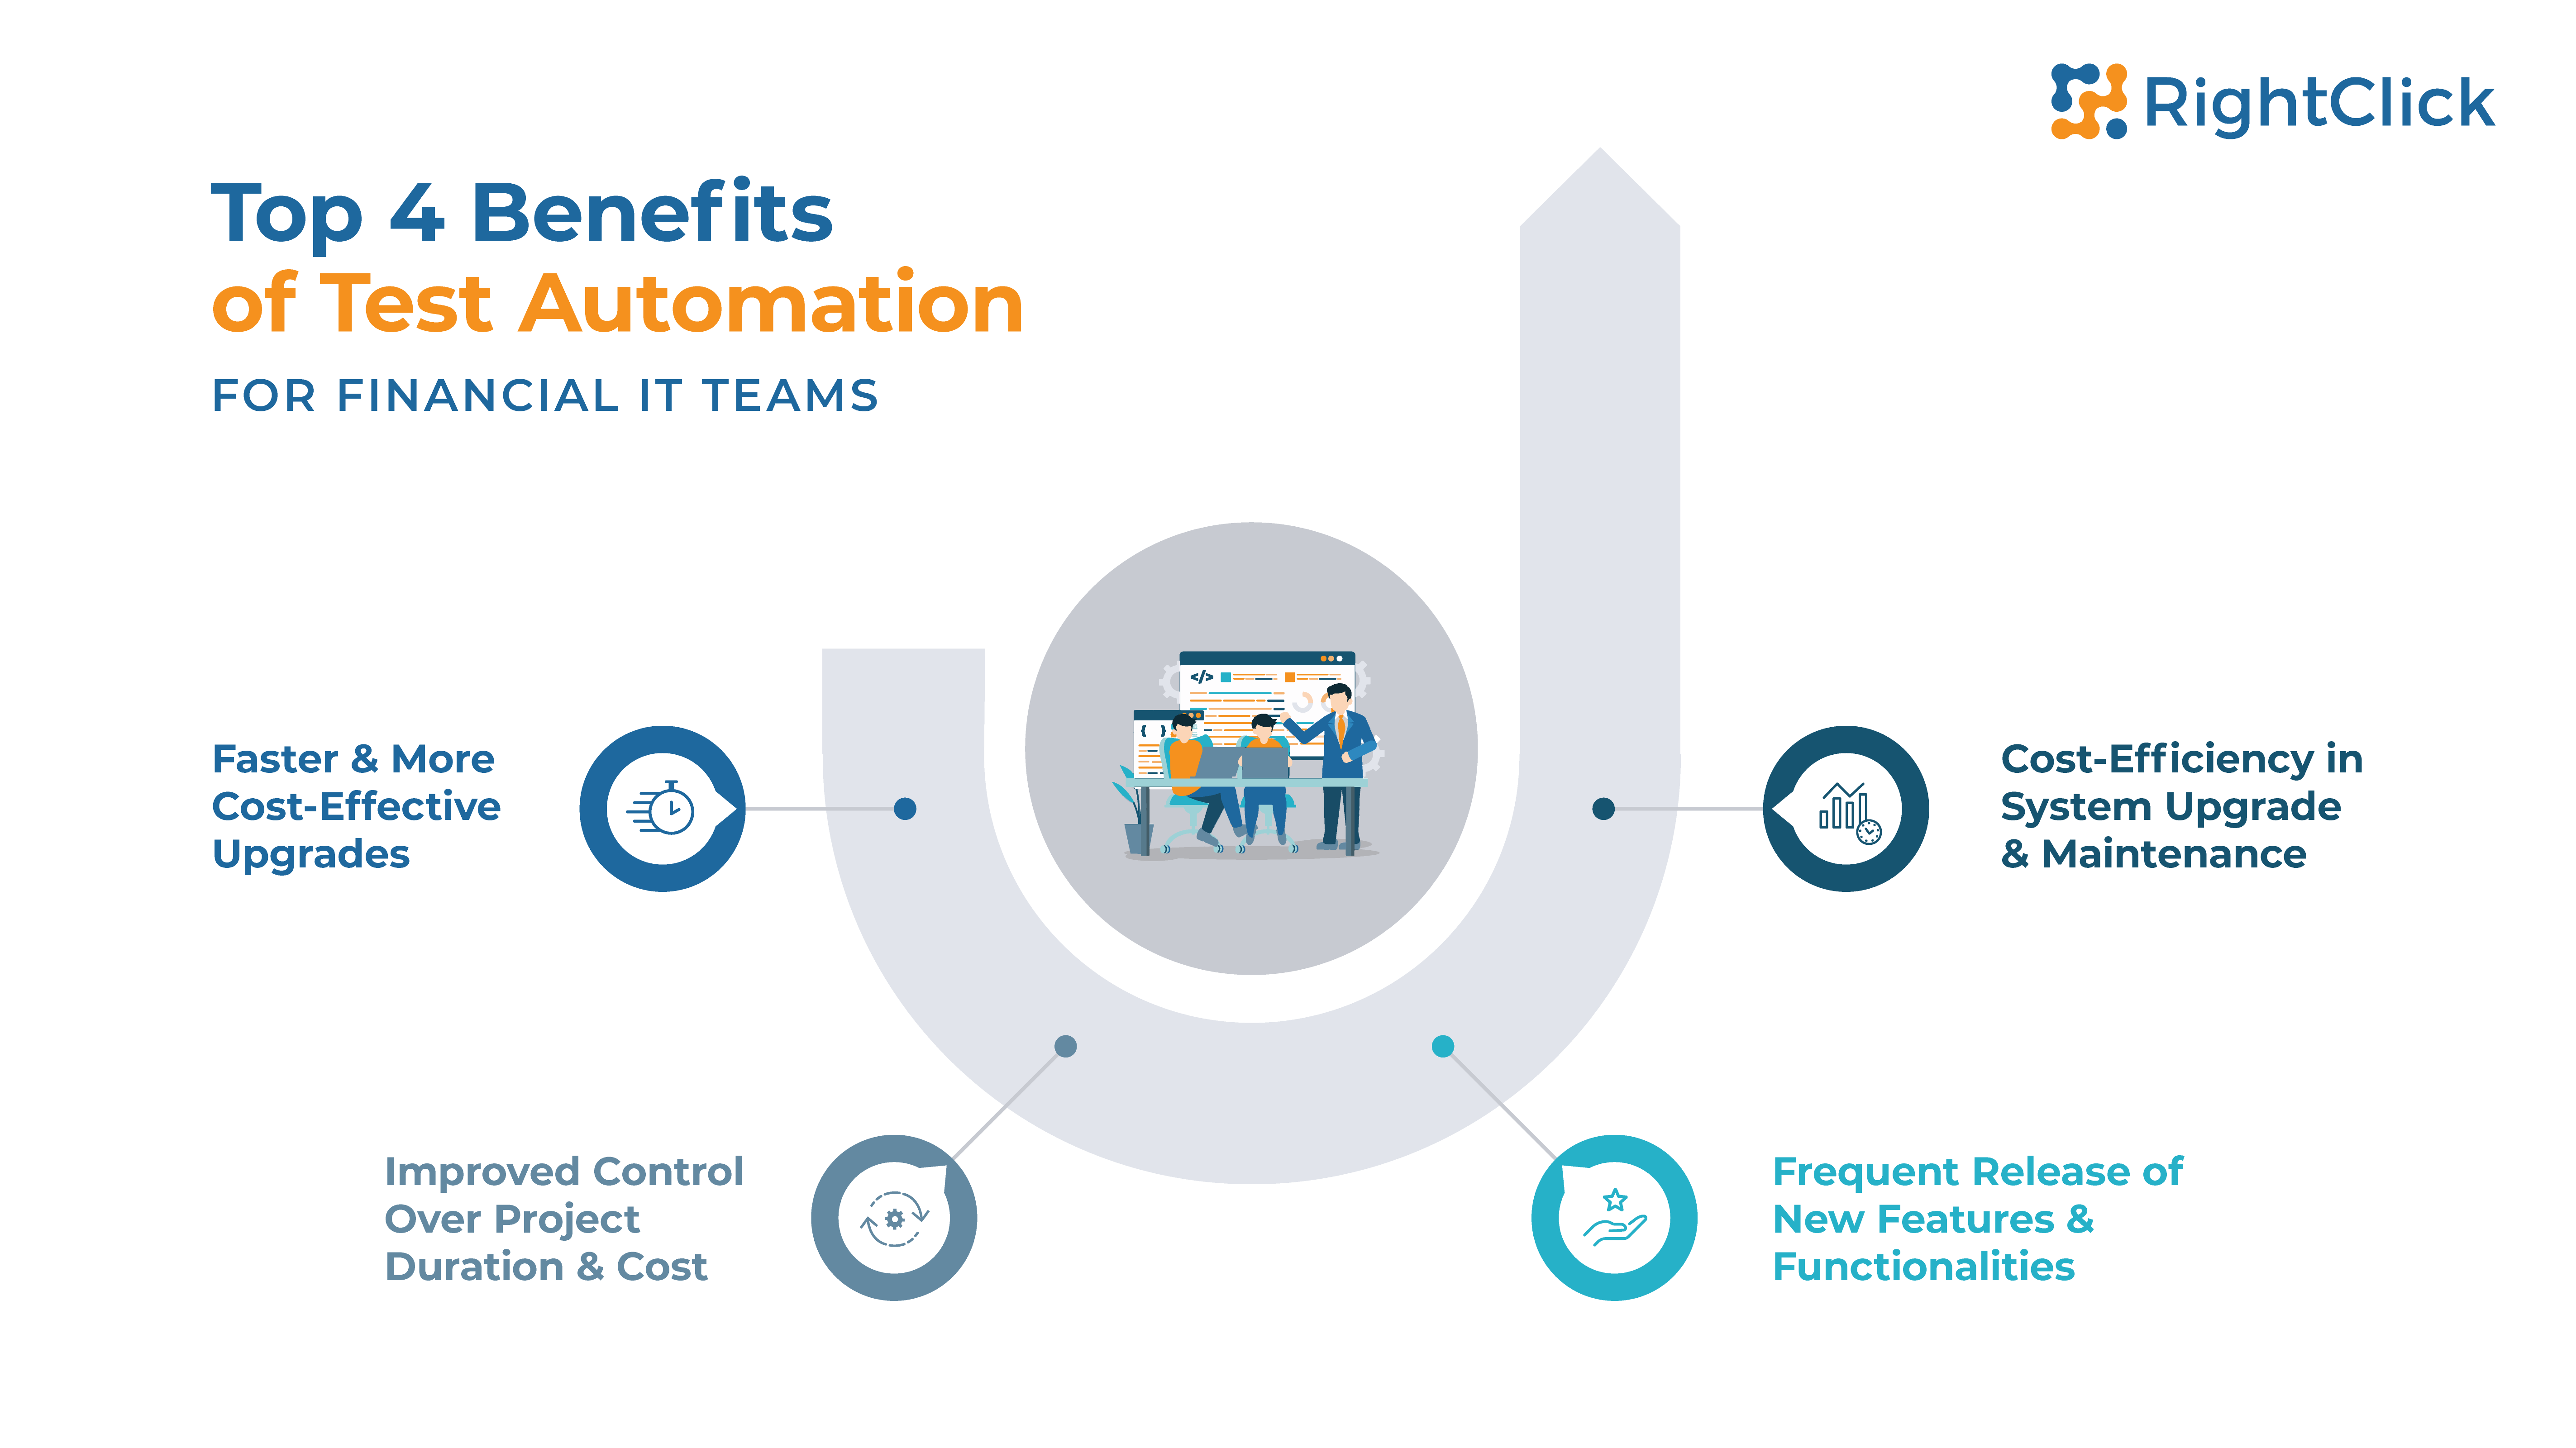 Test automation benefits for financial IT